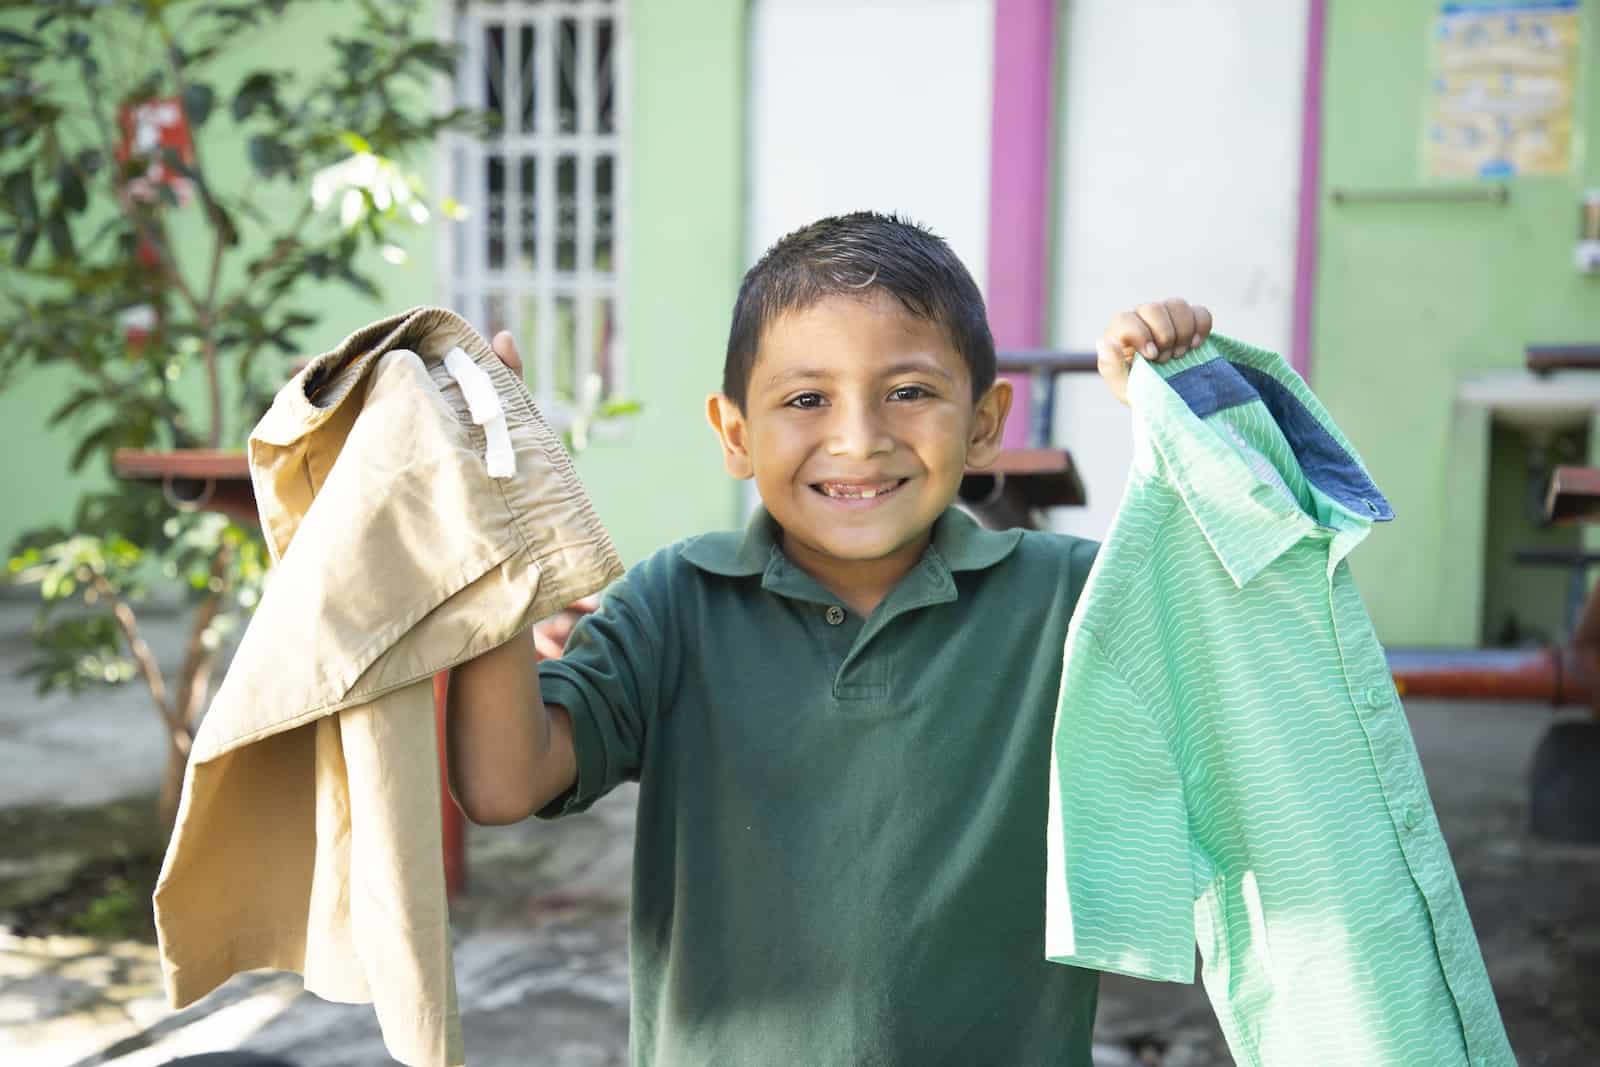 A boy holds up a shirt and pants, smiling. 